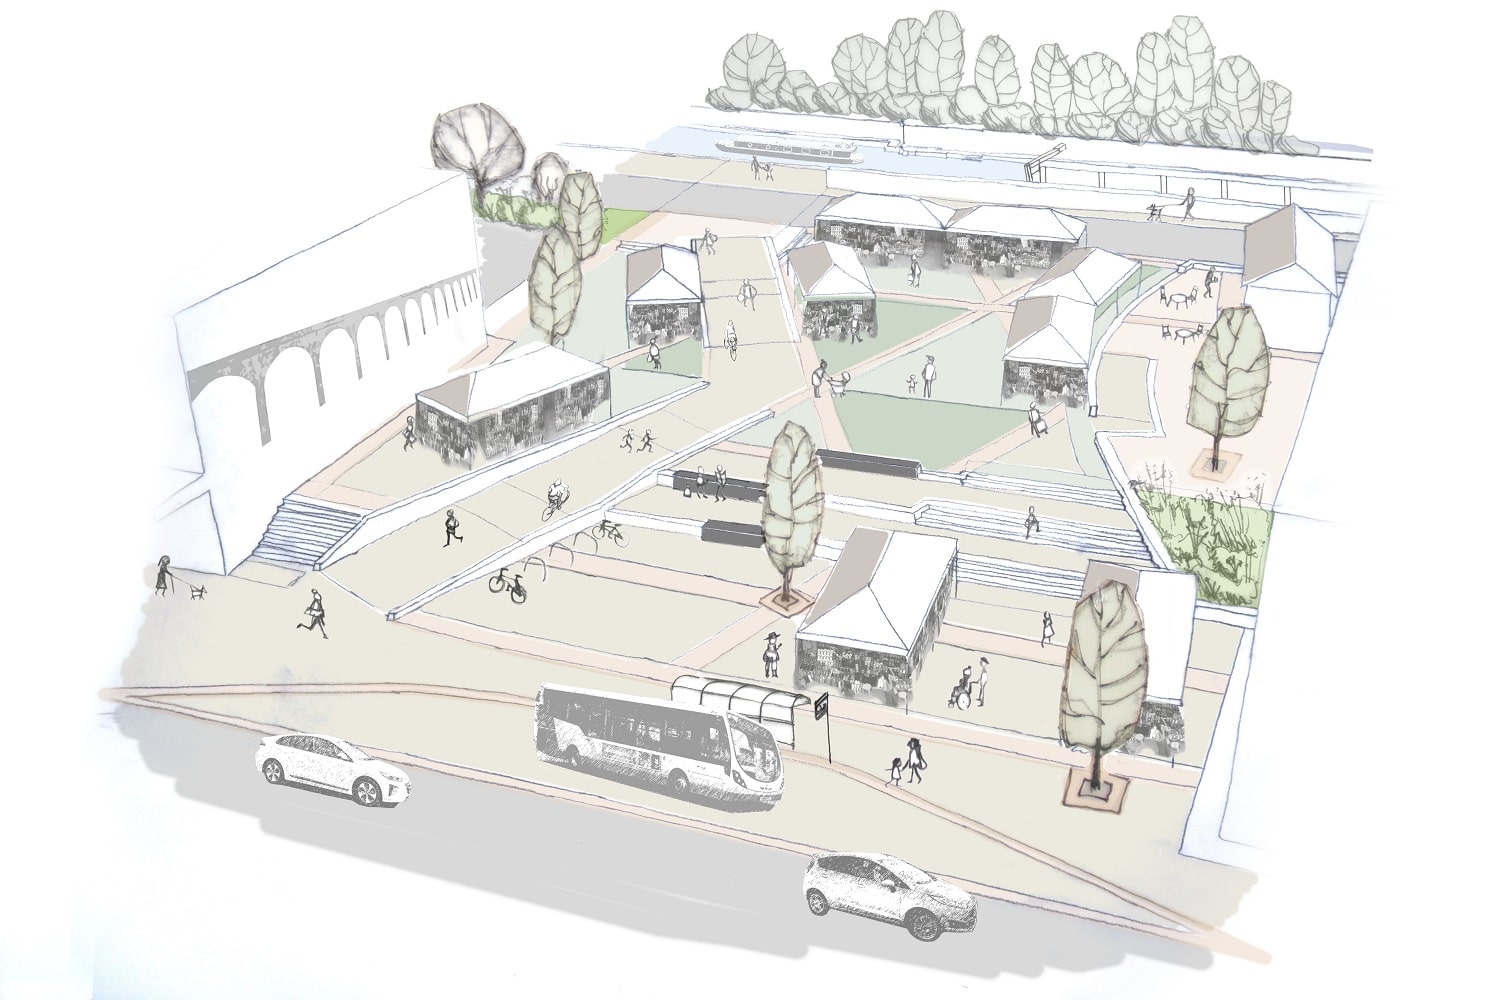 Visualisation of draft proposals for Sowerby Bridge 